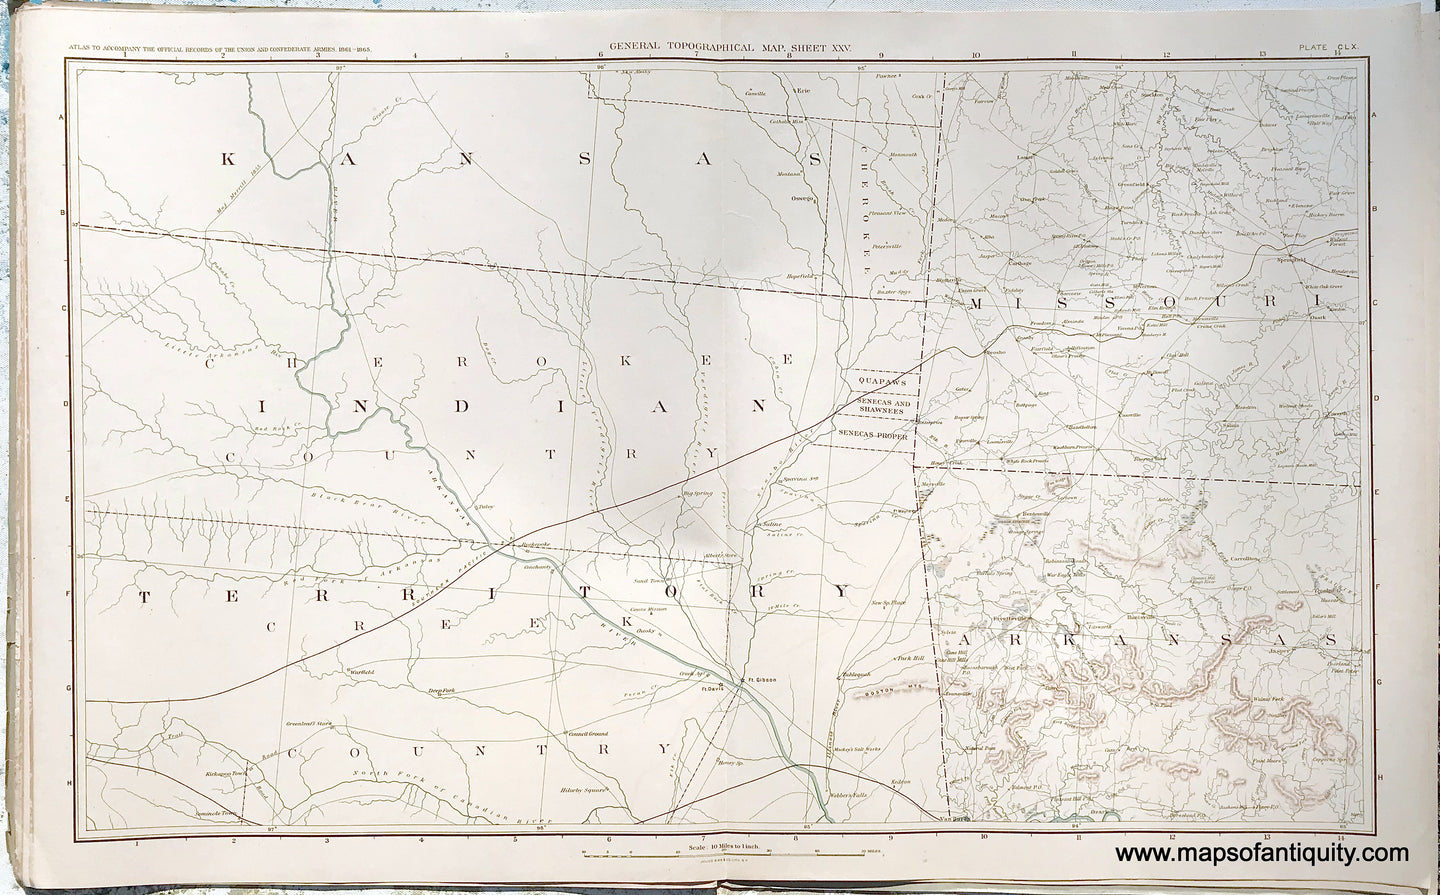 Antique-Lithograph-Print-Plate-160.-General-Topographical-Map.-Sheet-XXV.-Sections-of-Kansas-Indian-Territory-with-tribes-mentioned-Missouri-and-Arkansas.-1894-US-War-Dept.-Civil-War-Civil-War-1800s-19th-century-Maps-of-Antiquity